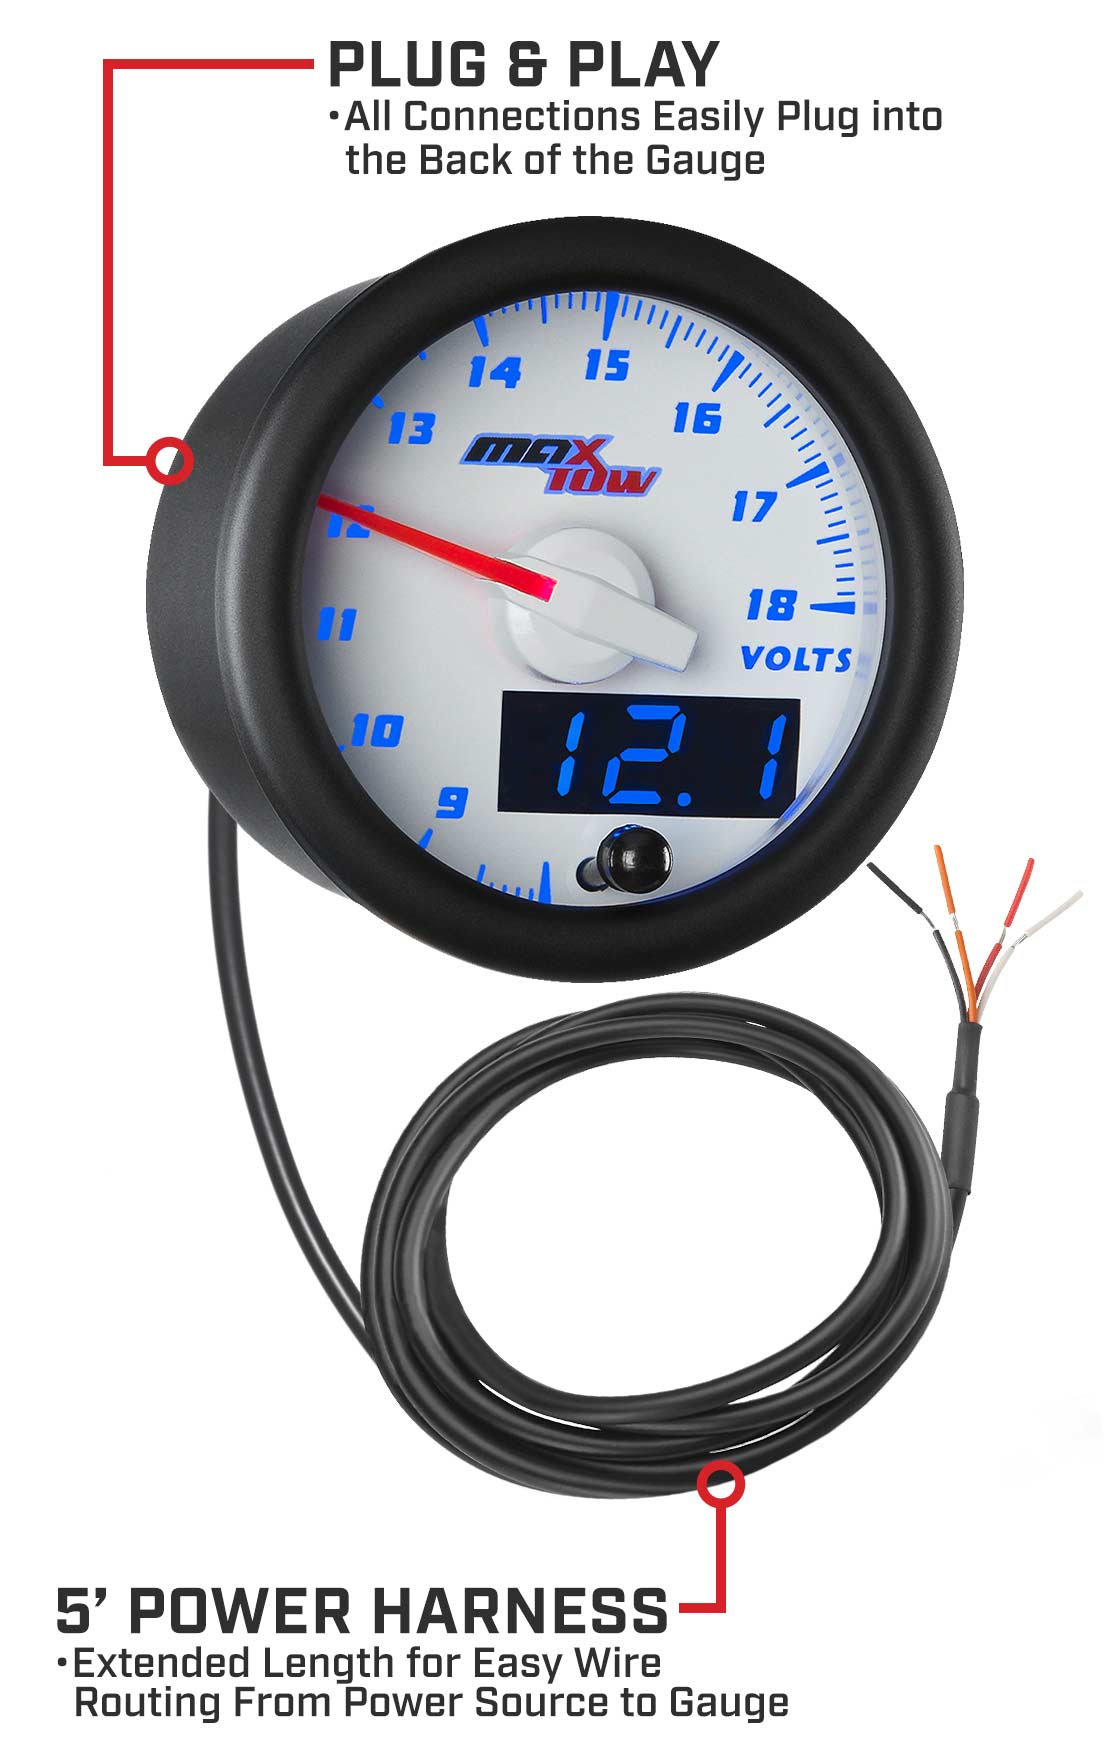 White & Blue Double Vision Voltmeter Gauge Parts & Wiring